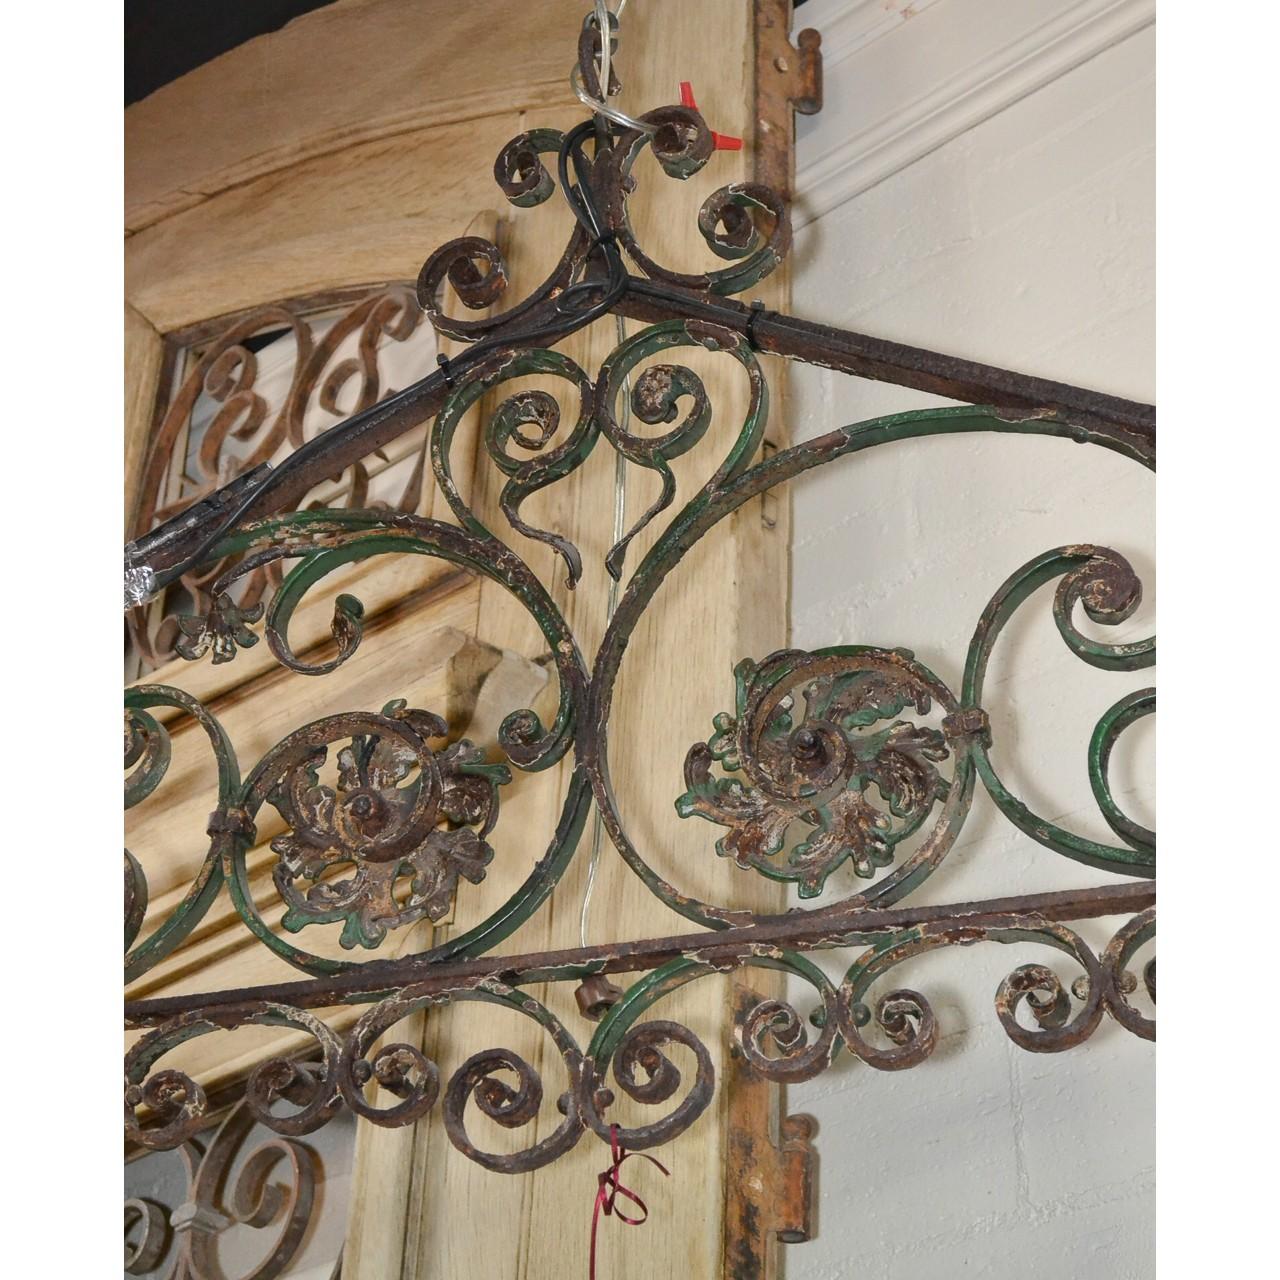 Unique 19th century French architectural handwrought iron light fixture. Triangular in shape and ornately scrolled and contoured with two dome-shaped and ribbed shades,

circa 1870.